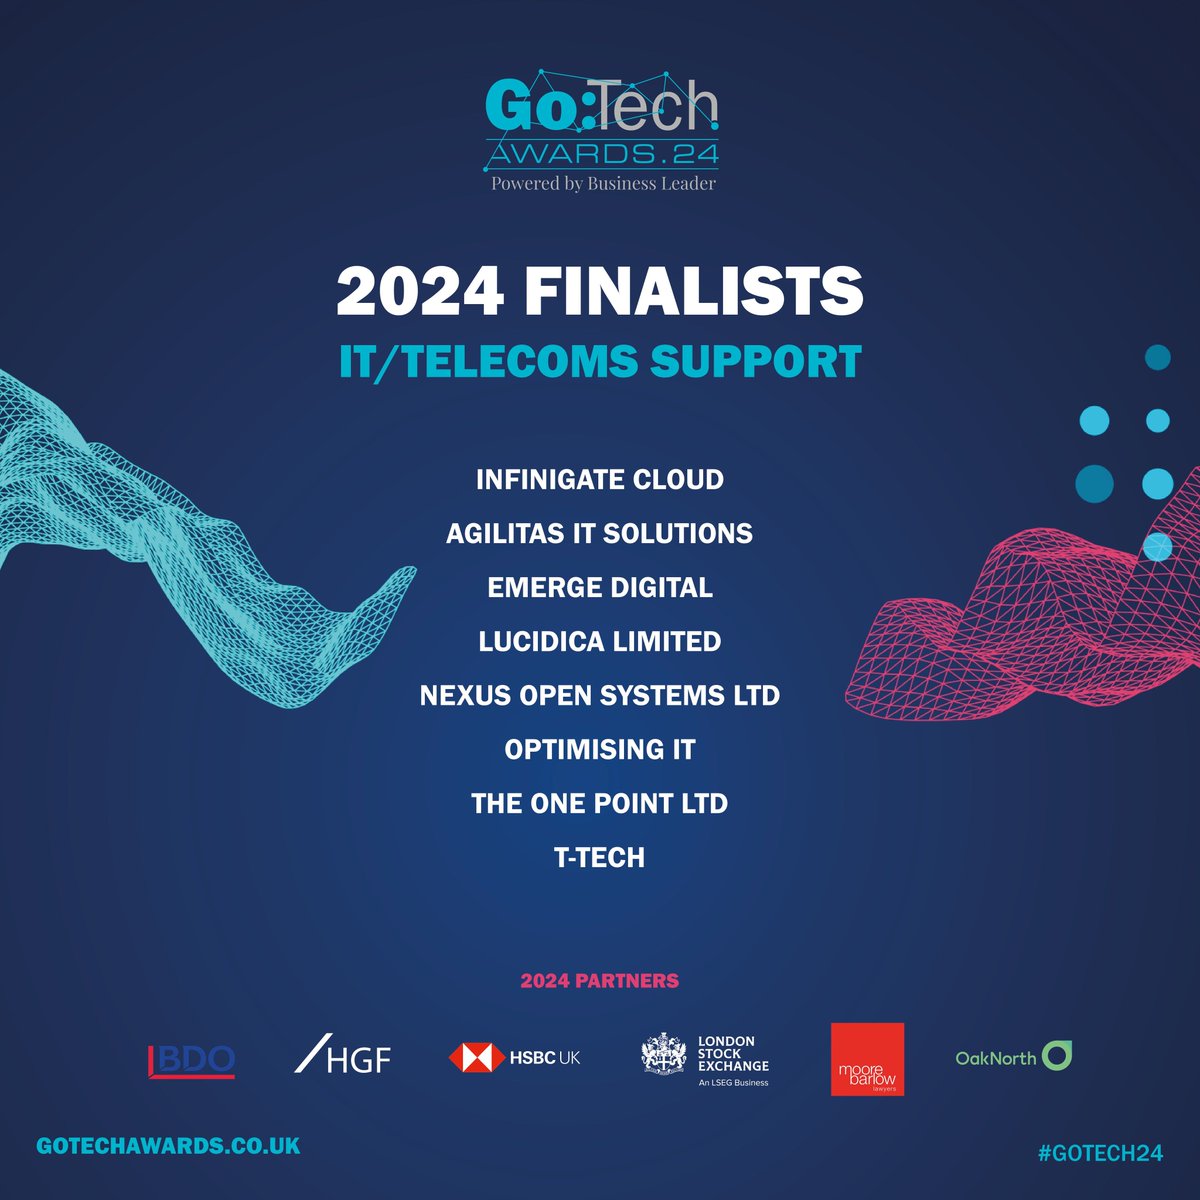 We are finalists in The Go: Tech Awards 2024!
 
With over 300+ entries, we are proud of our team for being selected as a finalist in the IT/Telecoms Support category. 
  
Good luck to everyone nominated across the categories. 

Read more - buff.ly/3xxszhQ 
 
#GoTech24